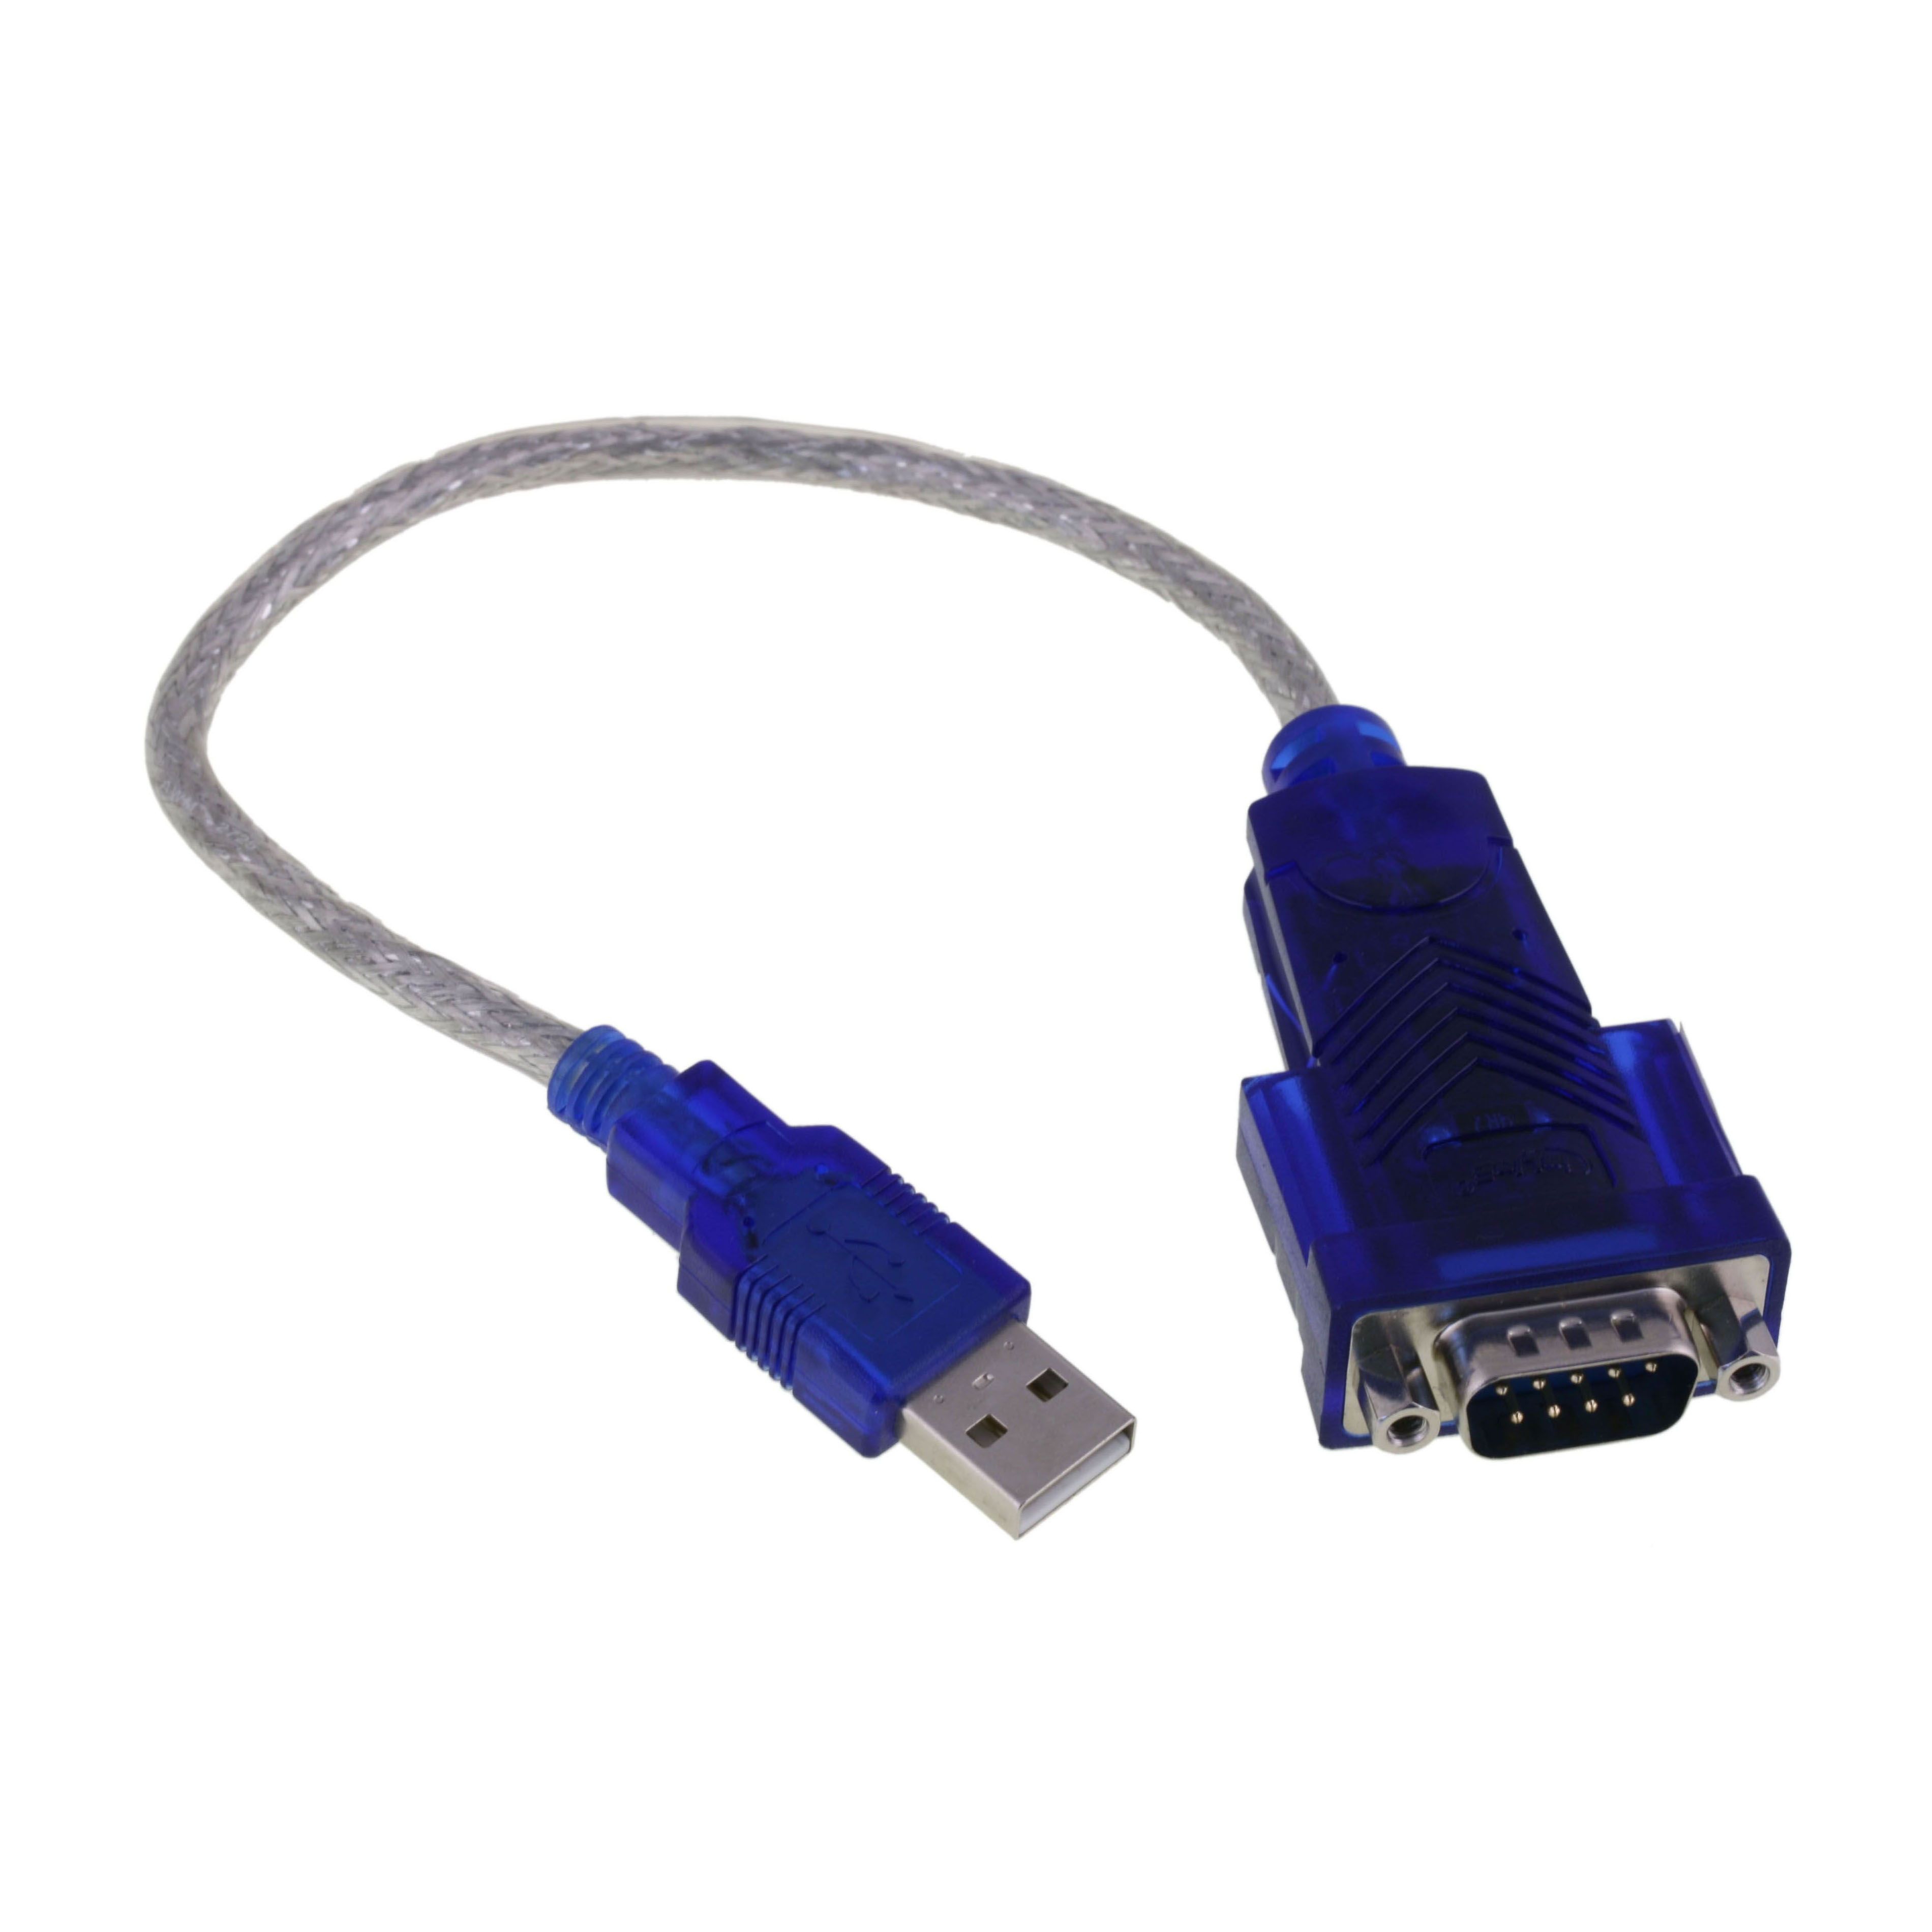 Adapter USB-to-Serial 30cm with chipset PROLIFIC PL-2303